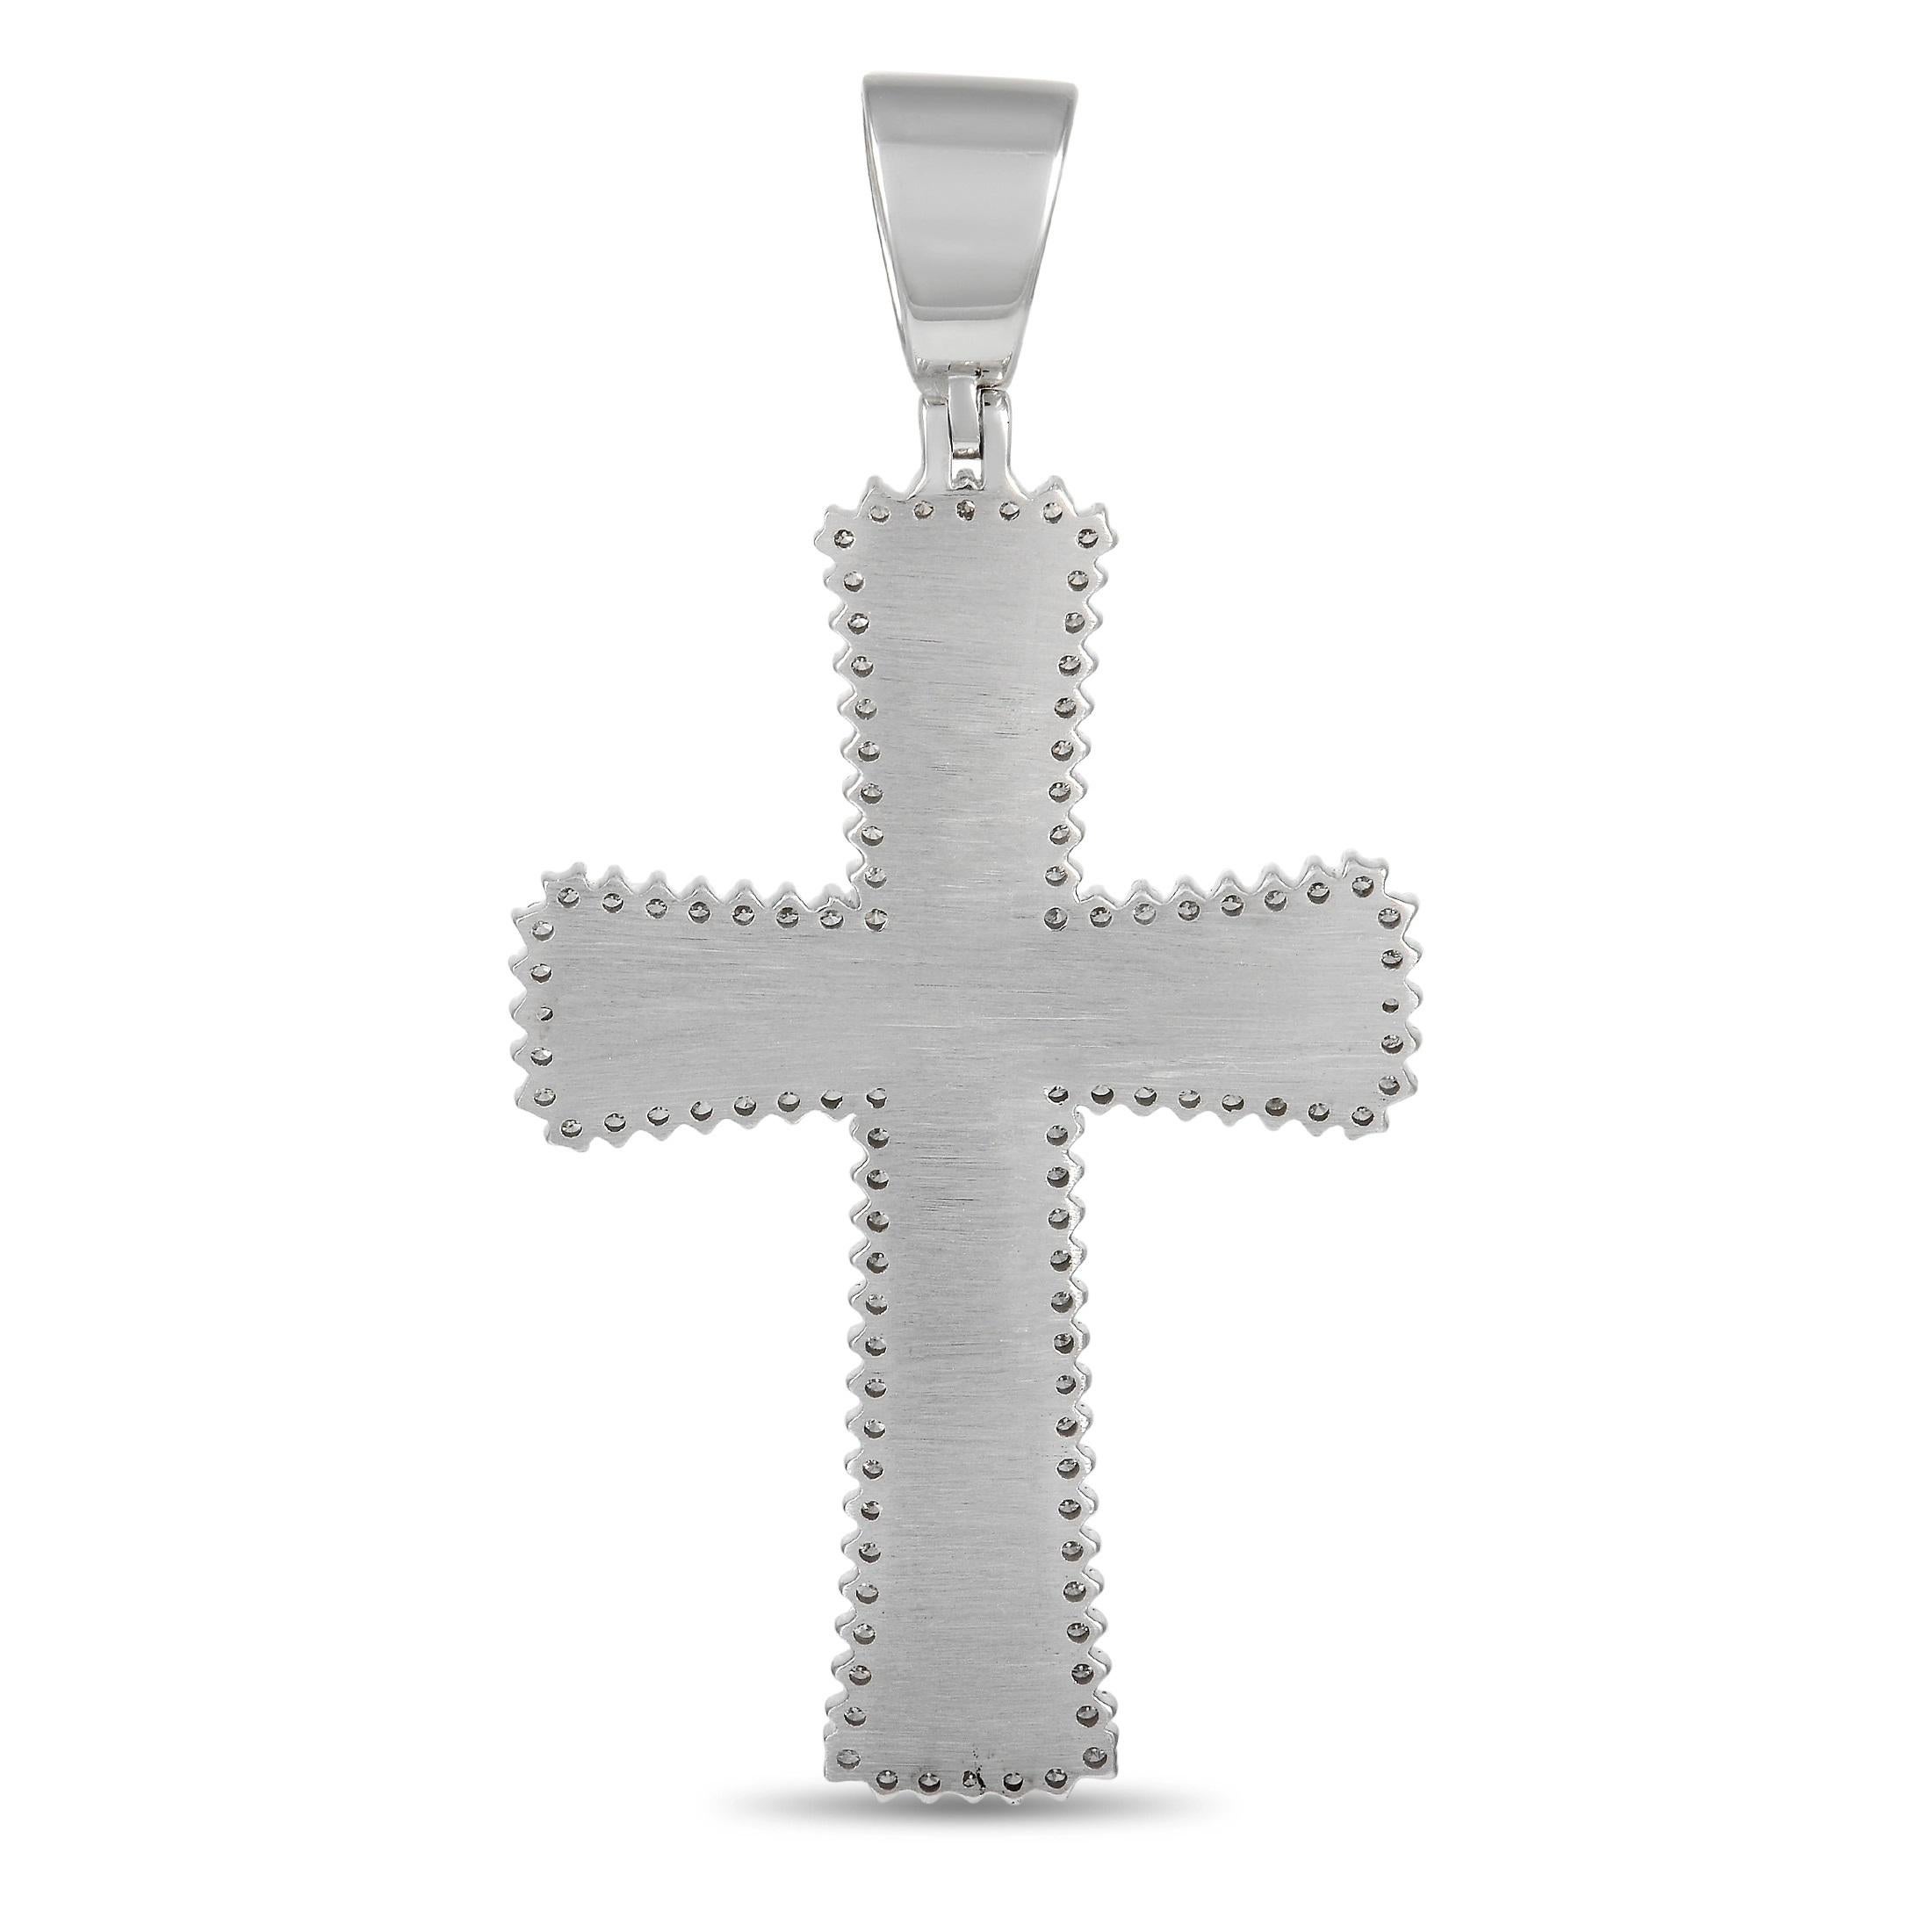 An iconic piece that will put your faith boldly on display, this shimmering cross-shaped pendant is truly luxurious. A 14K White Gold setting provides the perfect backdrop for the 2.95 carats of diamonds that sparkle and shine throughout the design.